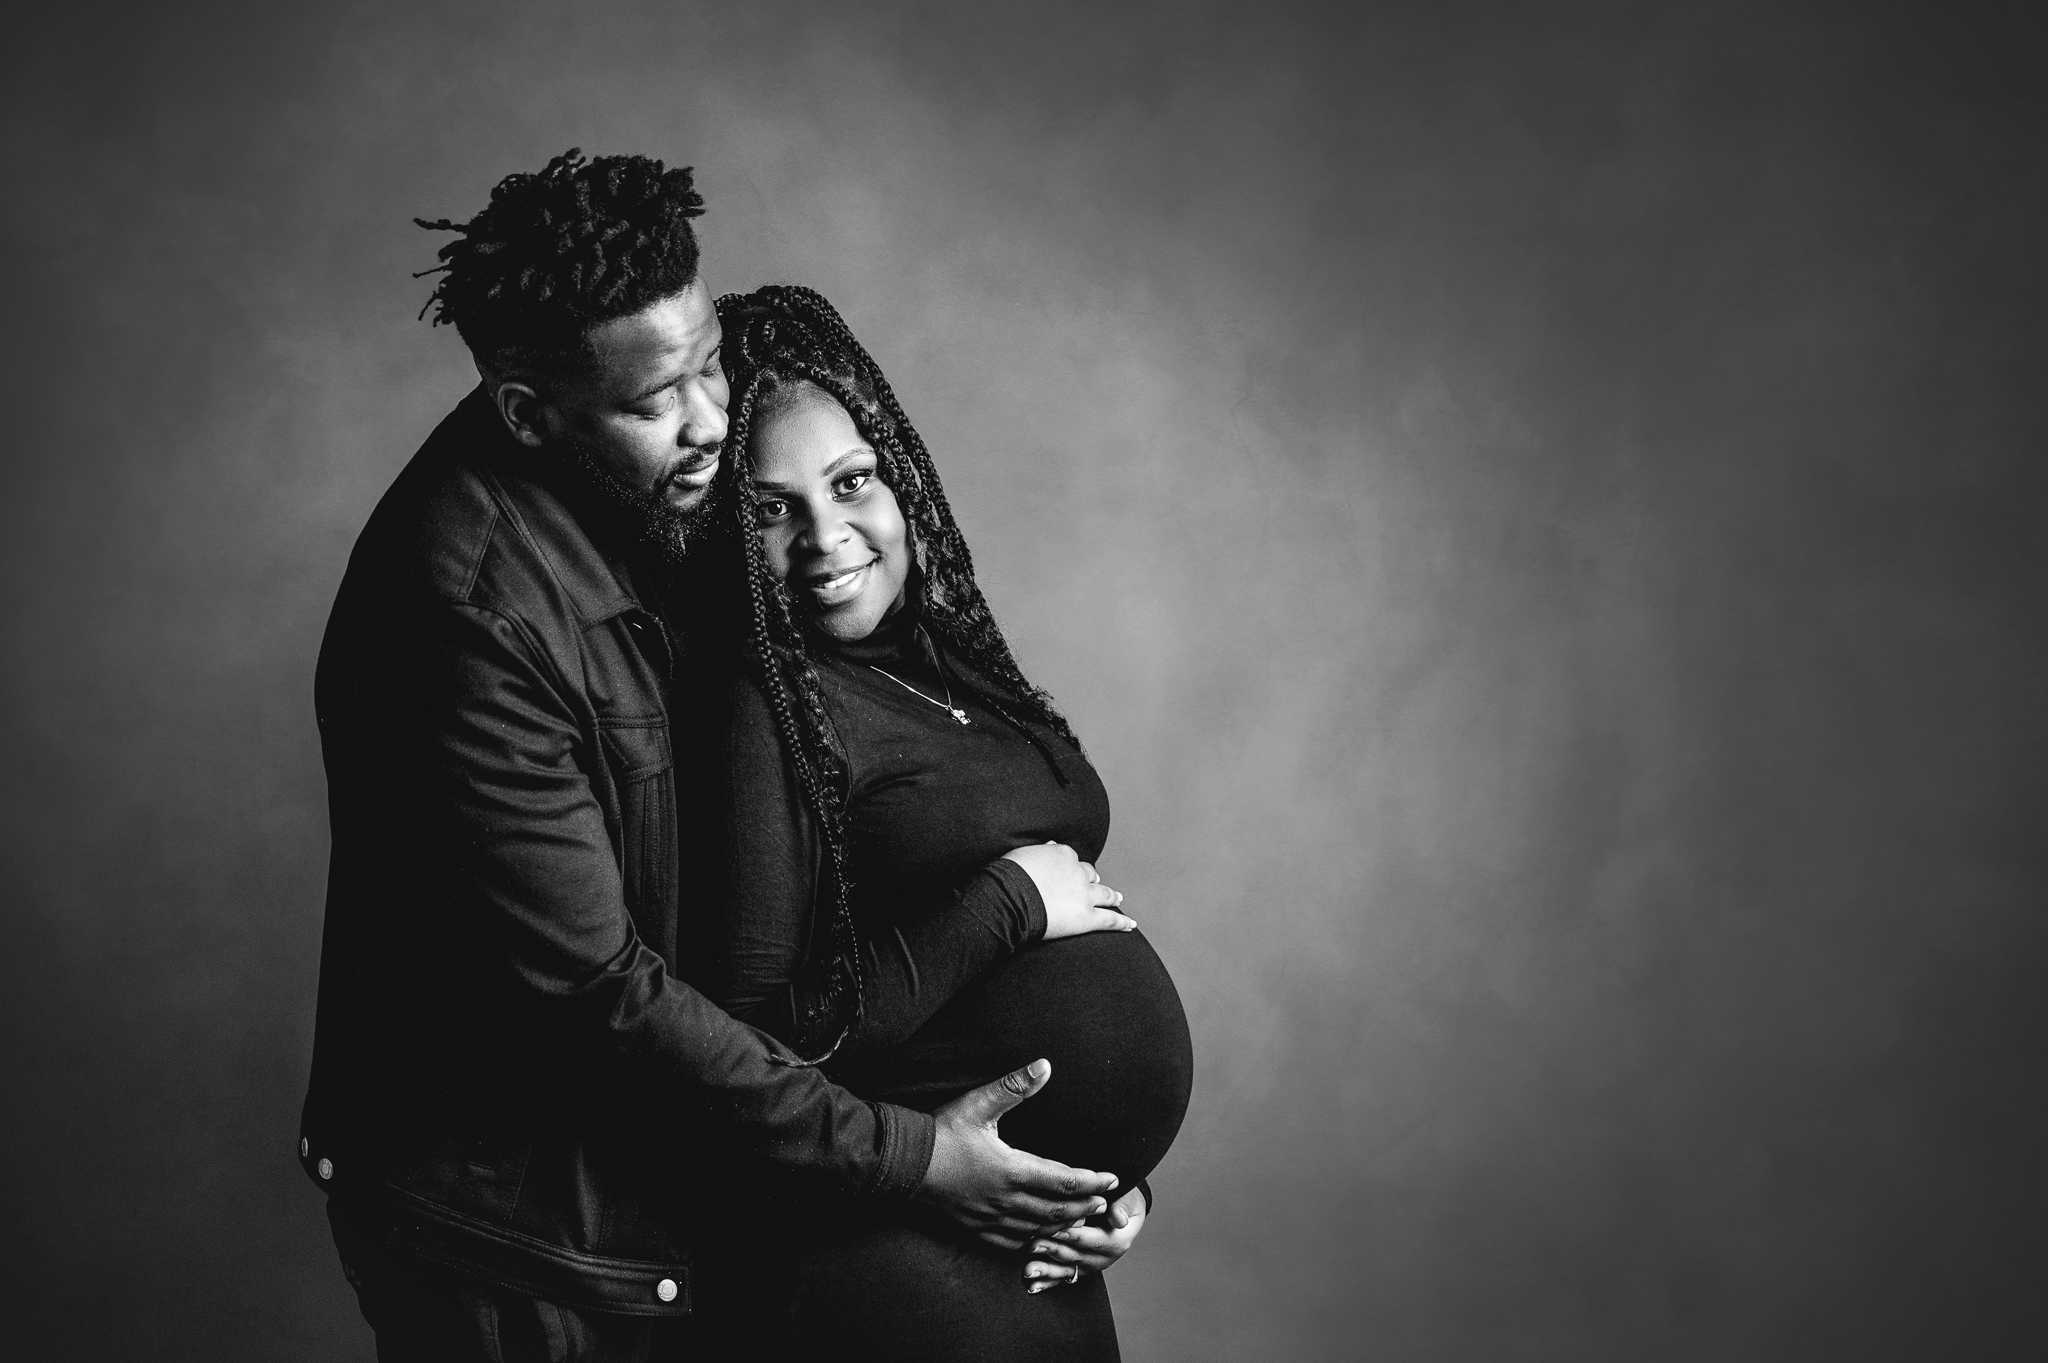 A studio photo of a couple. The lady is heavily pregnant and she is smiling at the camera